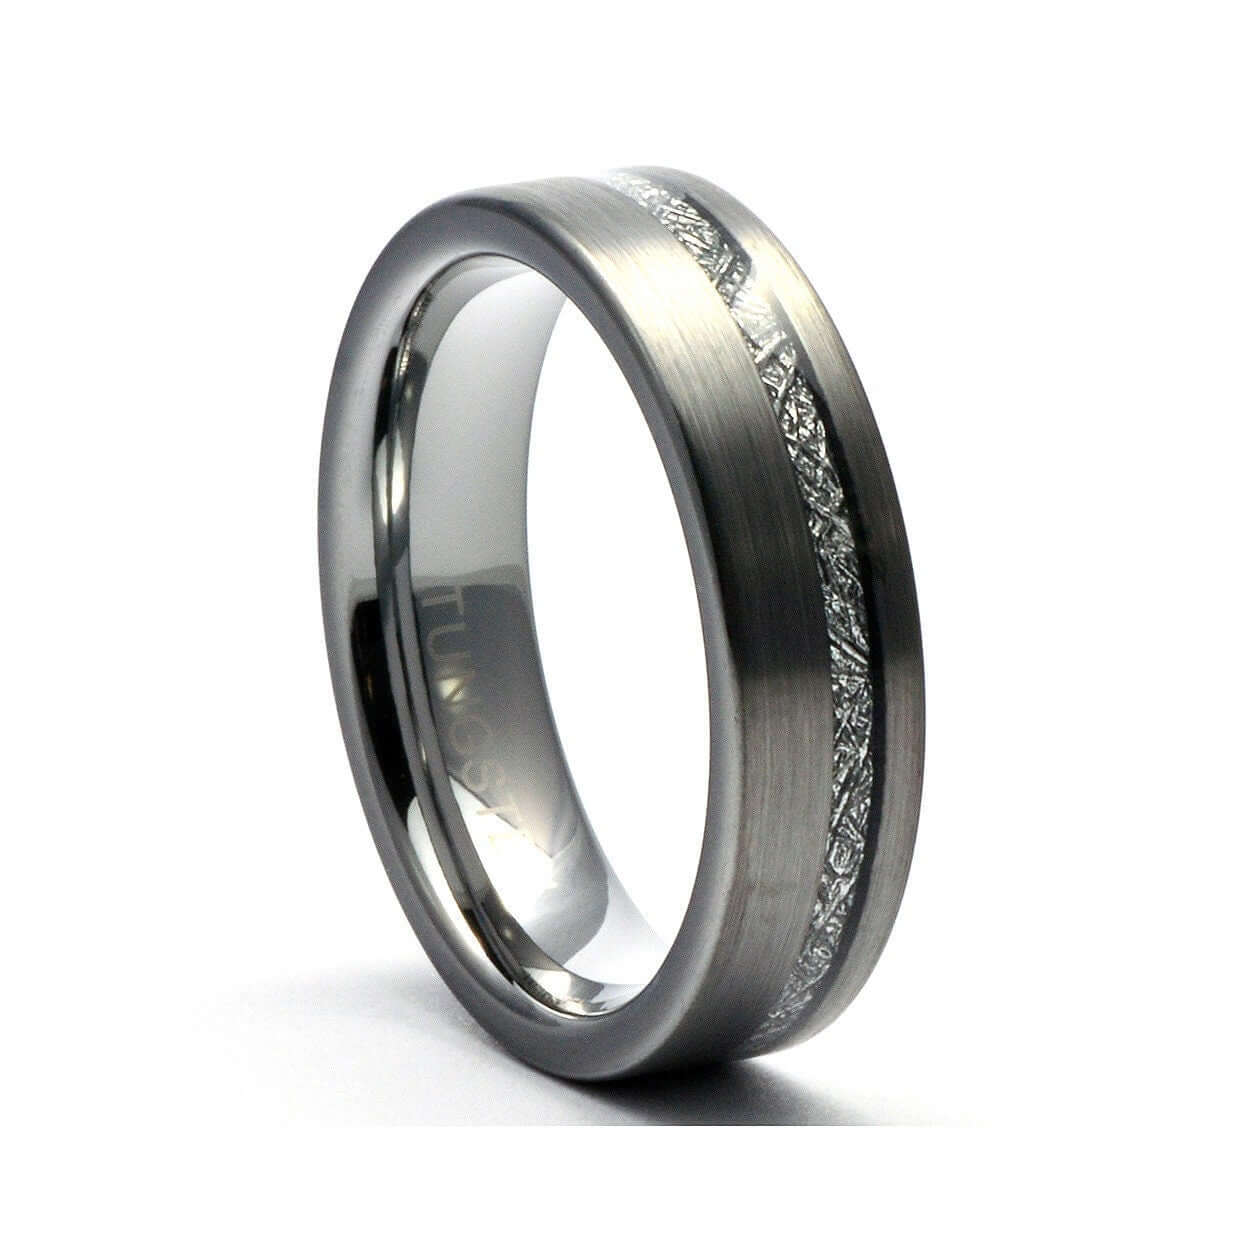 Tungsten Meteorite Ring, Mens Wedding Band, Tungsten Ring, Mens Wedding Ring, Tungsten Band, Meteorite Band Ring, Personalized Ring for Men